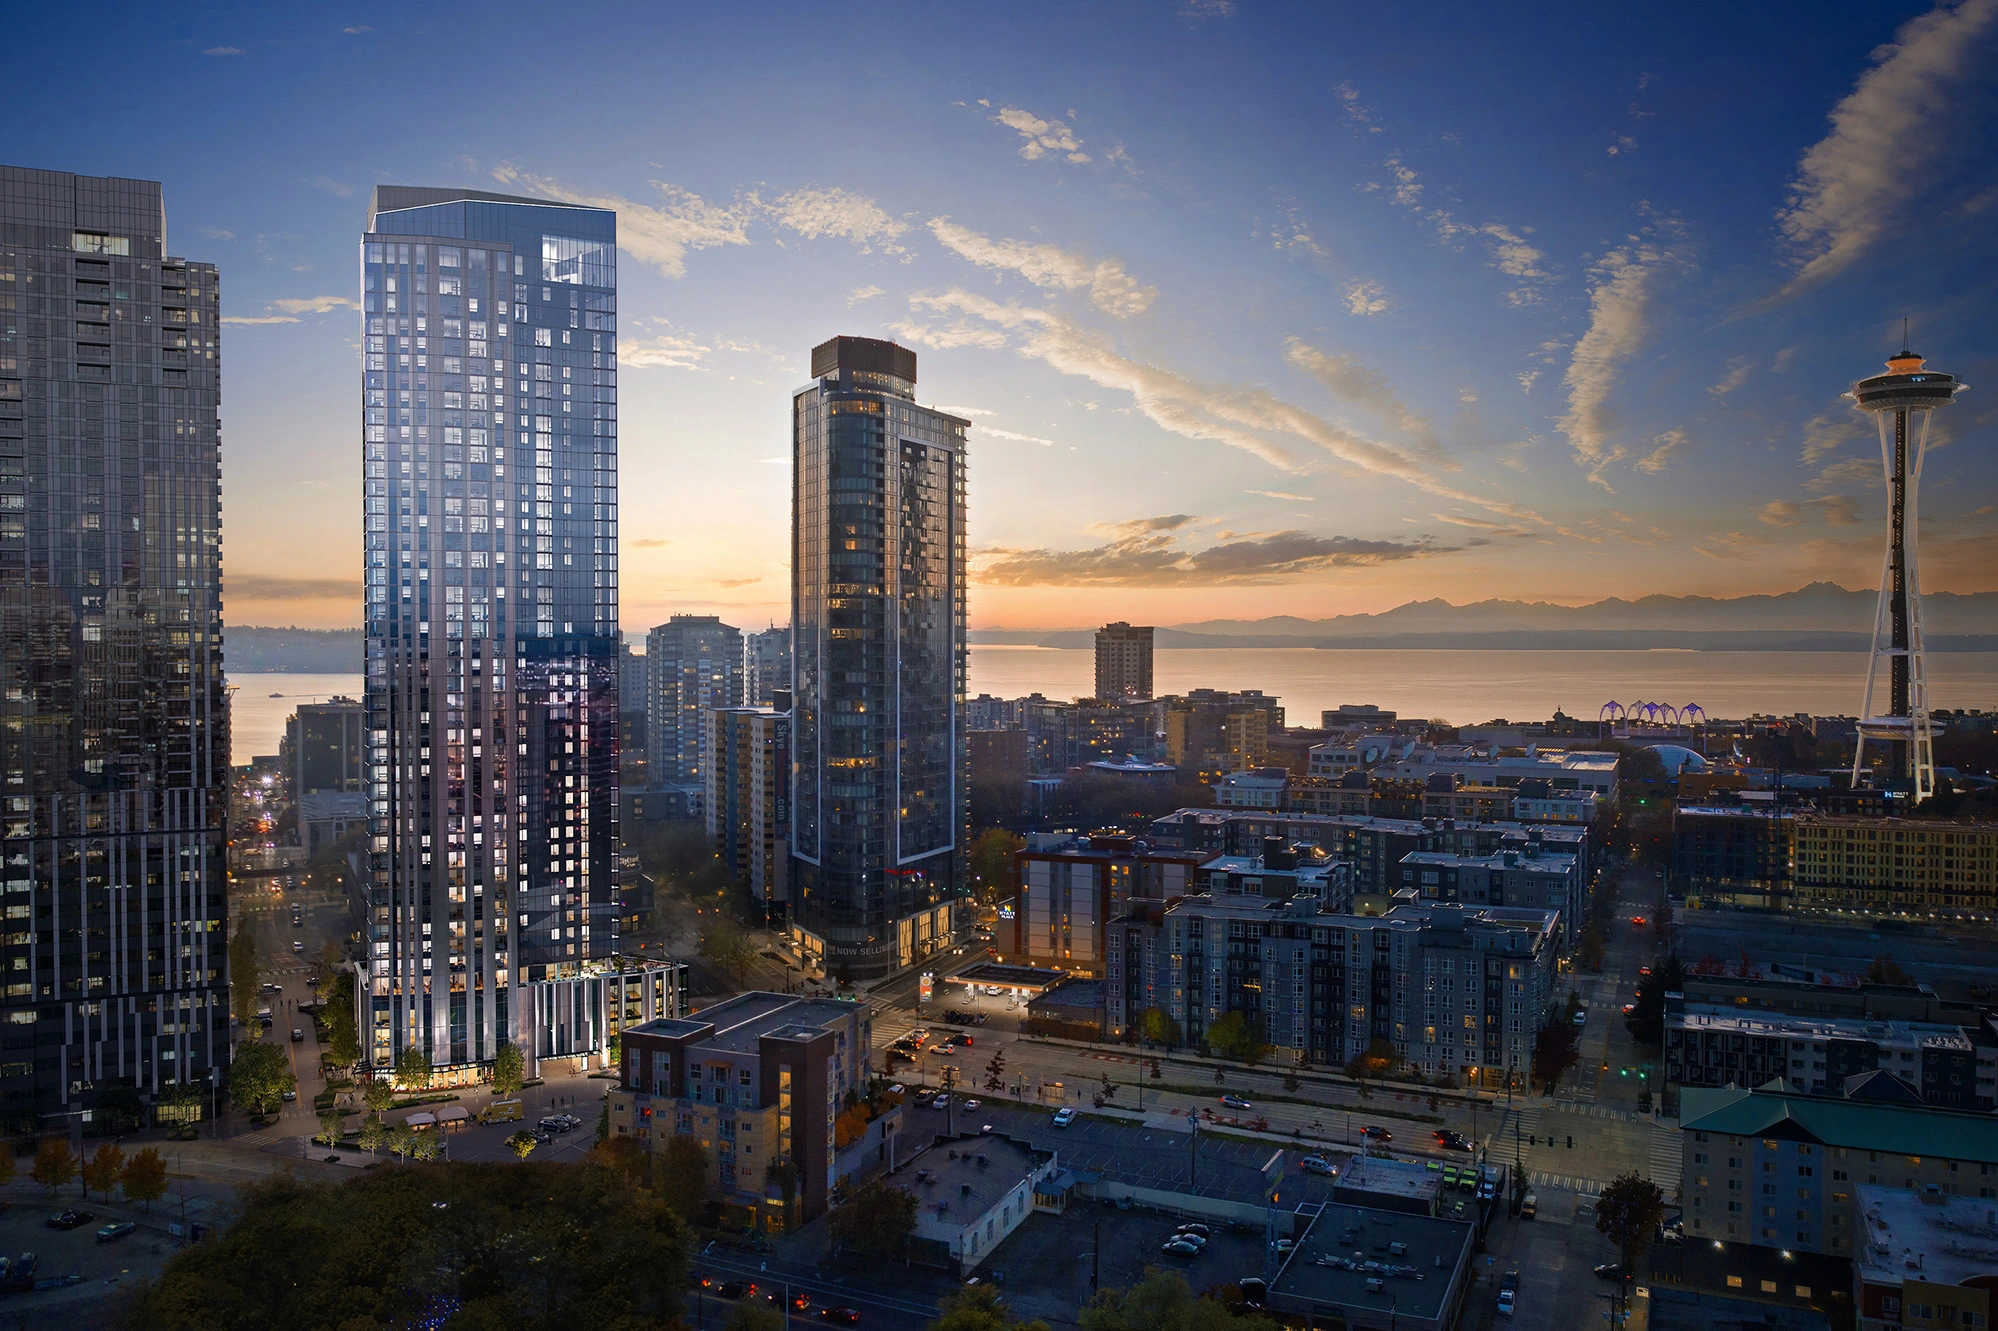 Rendering of aerial view of 616 Battery next to the Space Needle at dusk